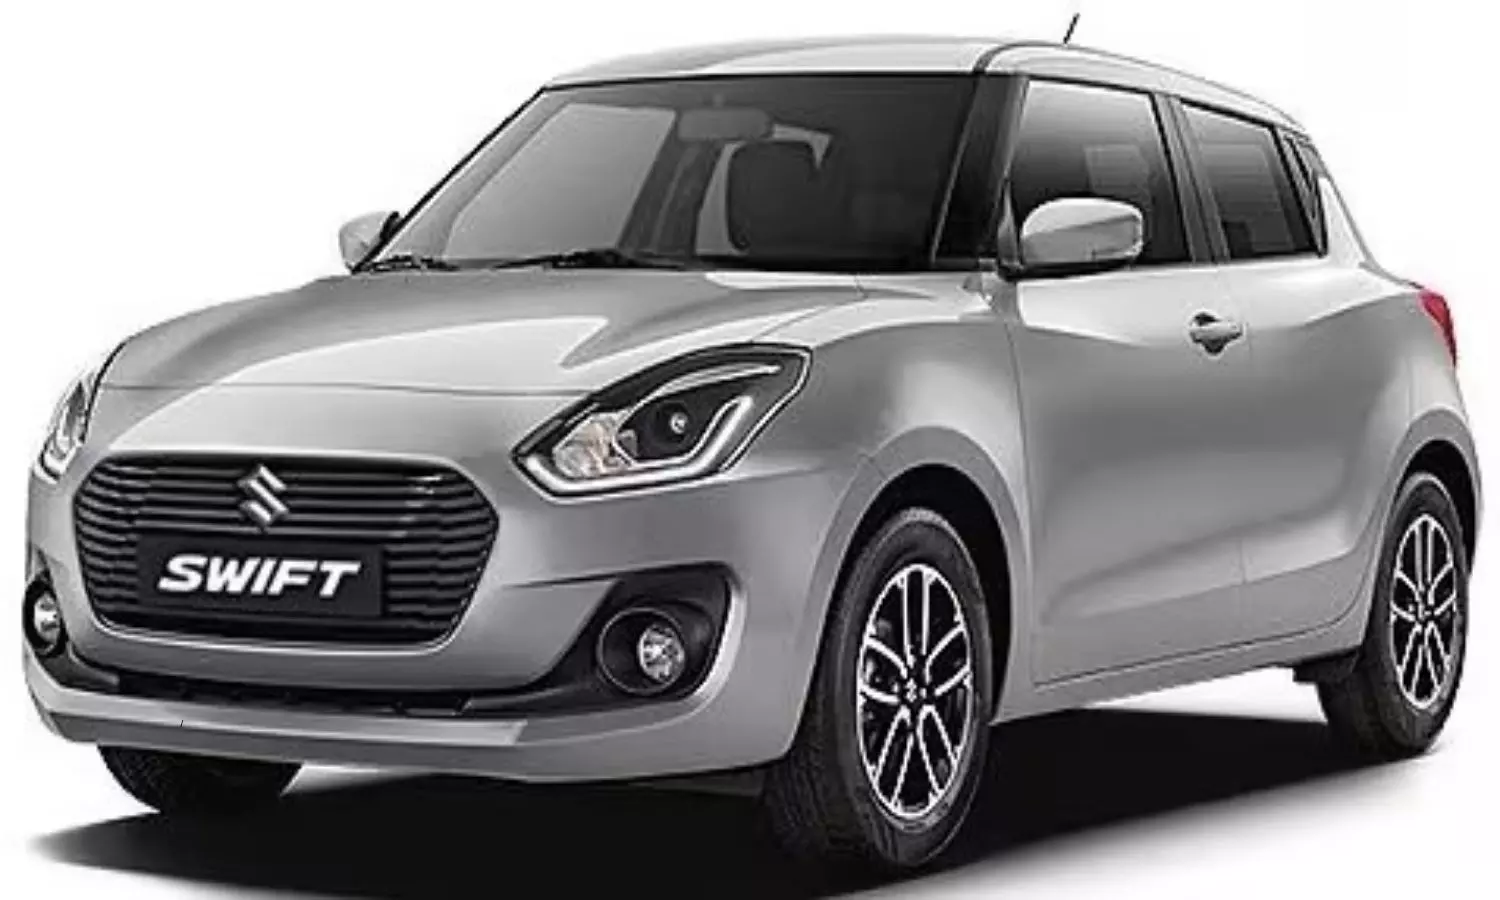 Check New Maruti Swift VXI Variant price and features in Telugu